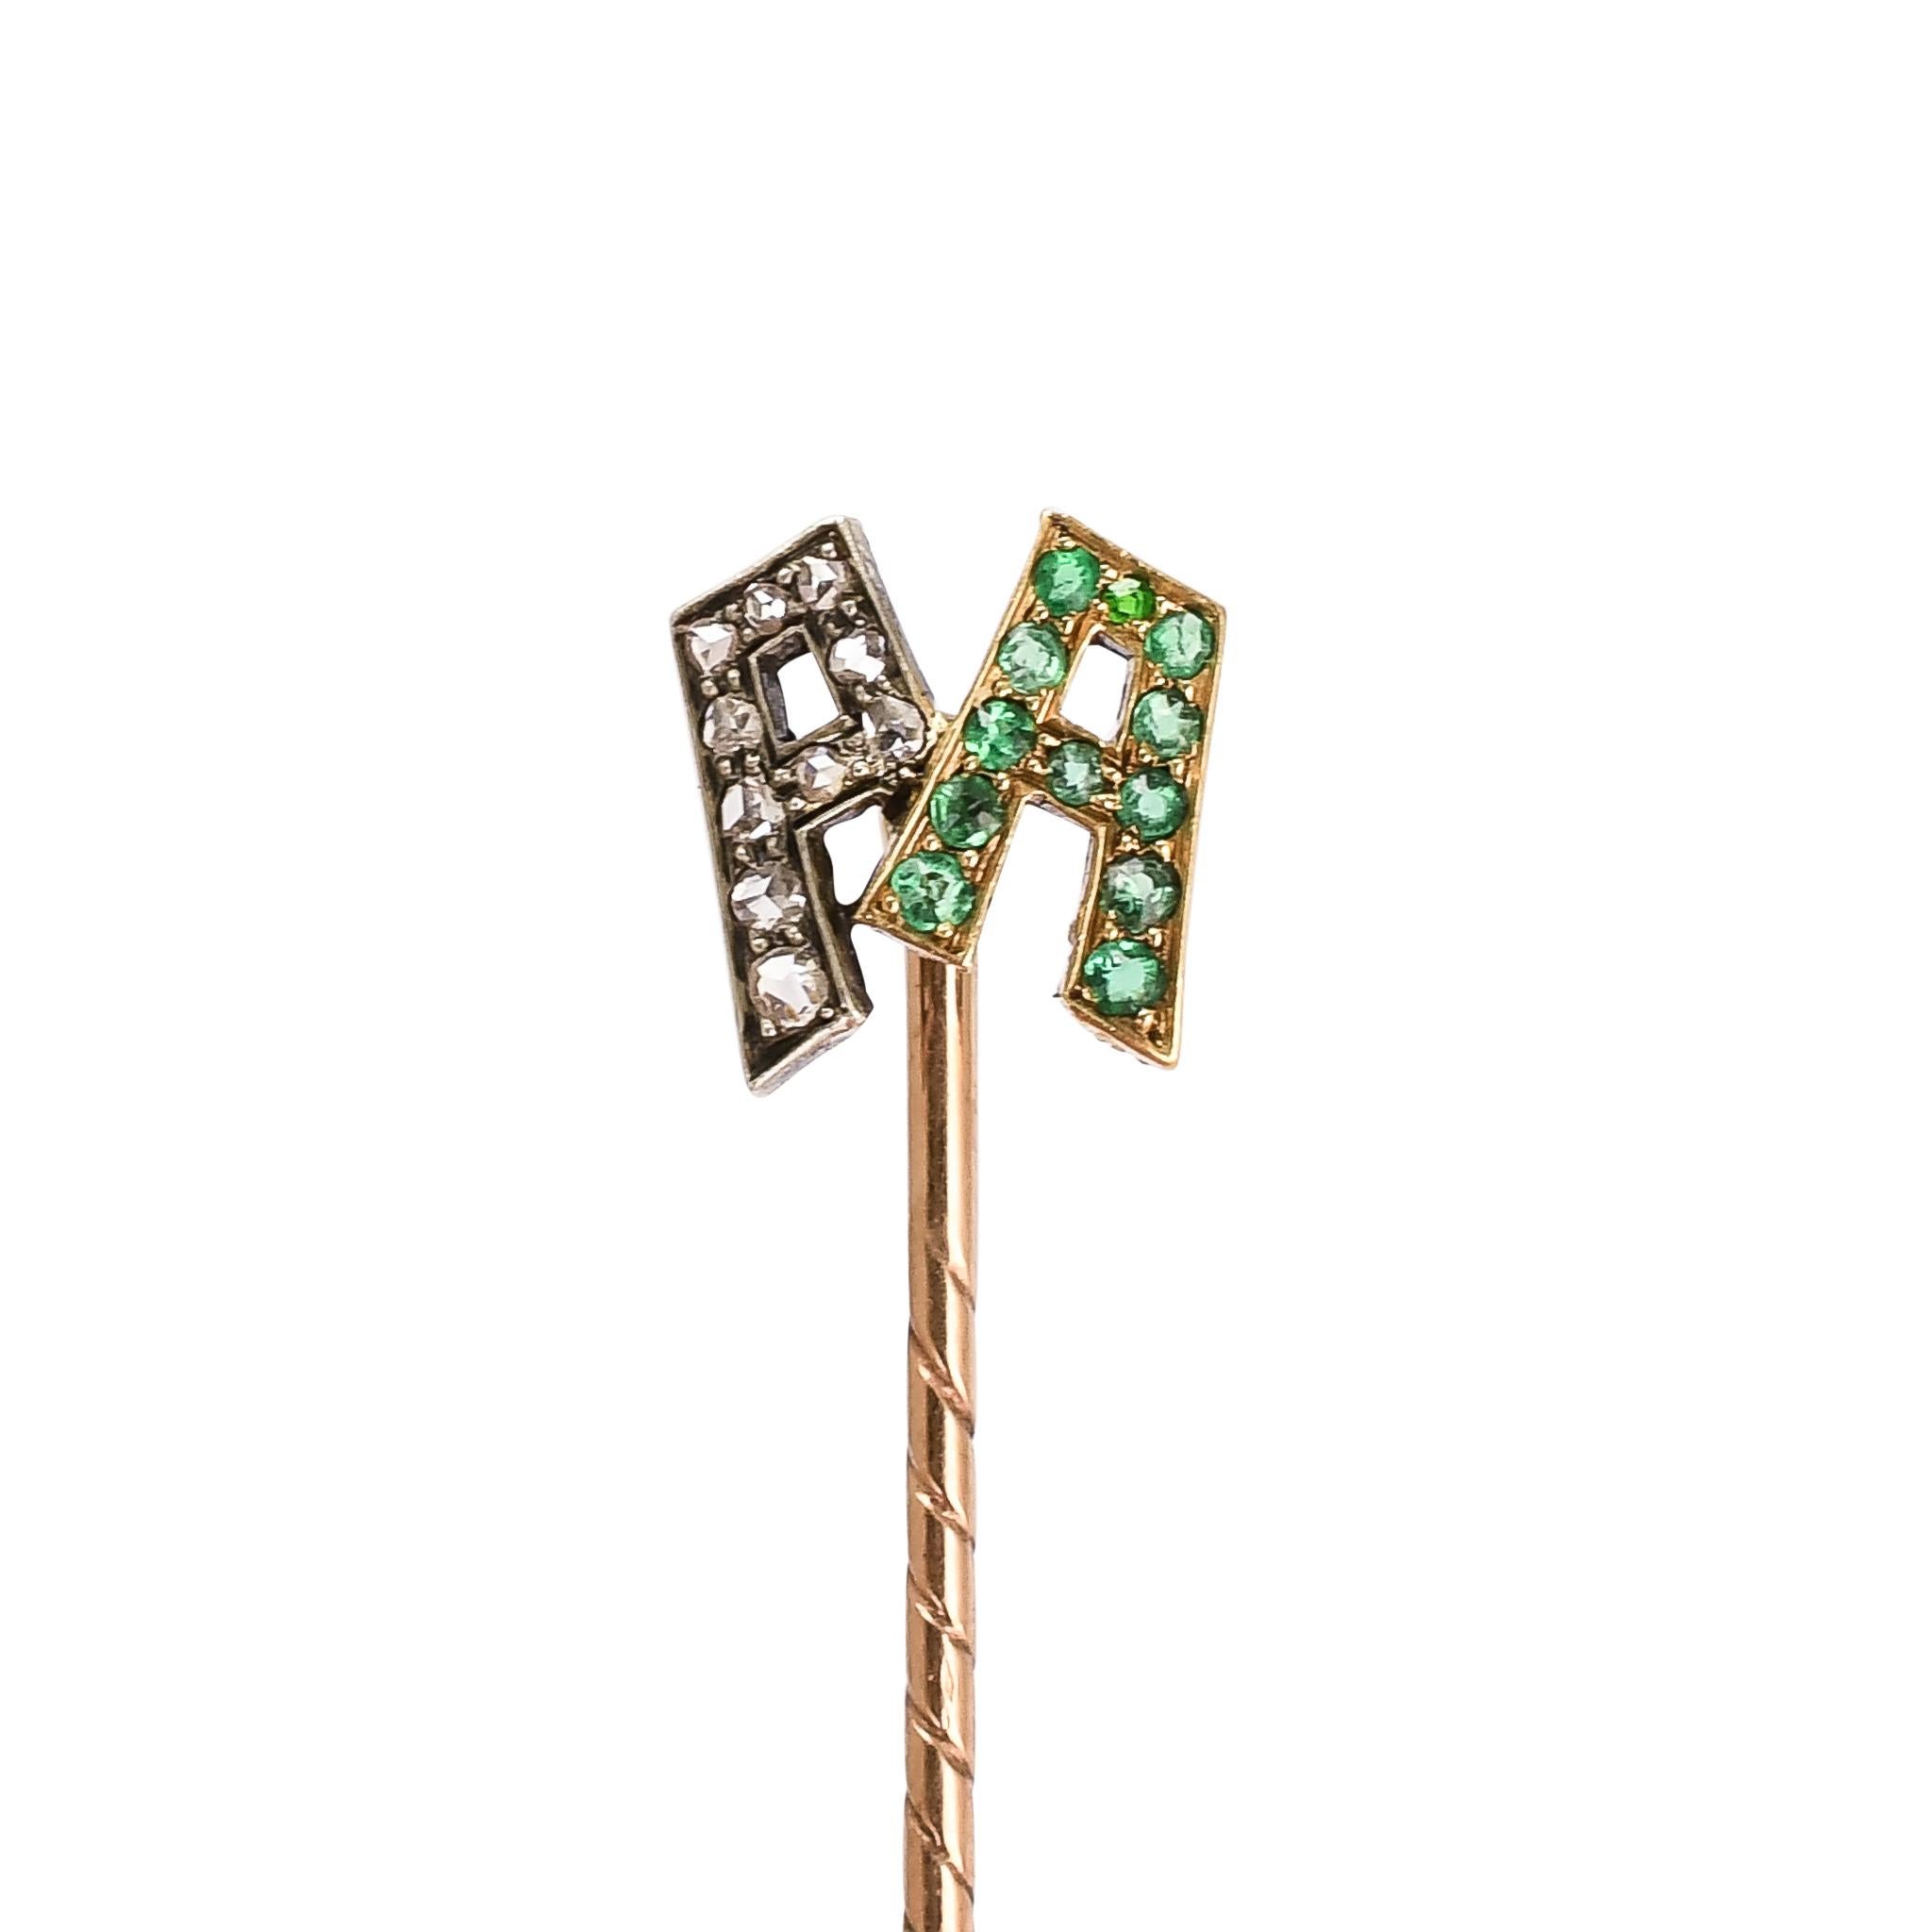 An outstanding antique stickpin featuring the initials PA set in diamonds and emeralds respectively. The font and general styling indicates that it dates from the turn of the 20th century, and it remains in great condition. Crafted in 15k gold and